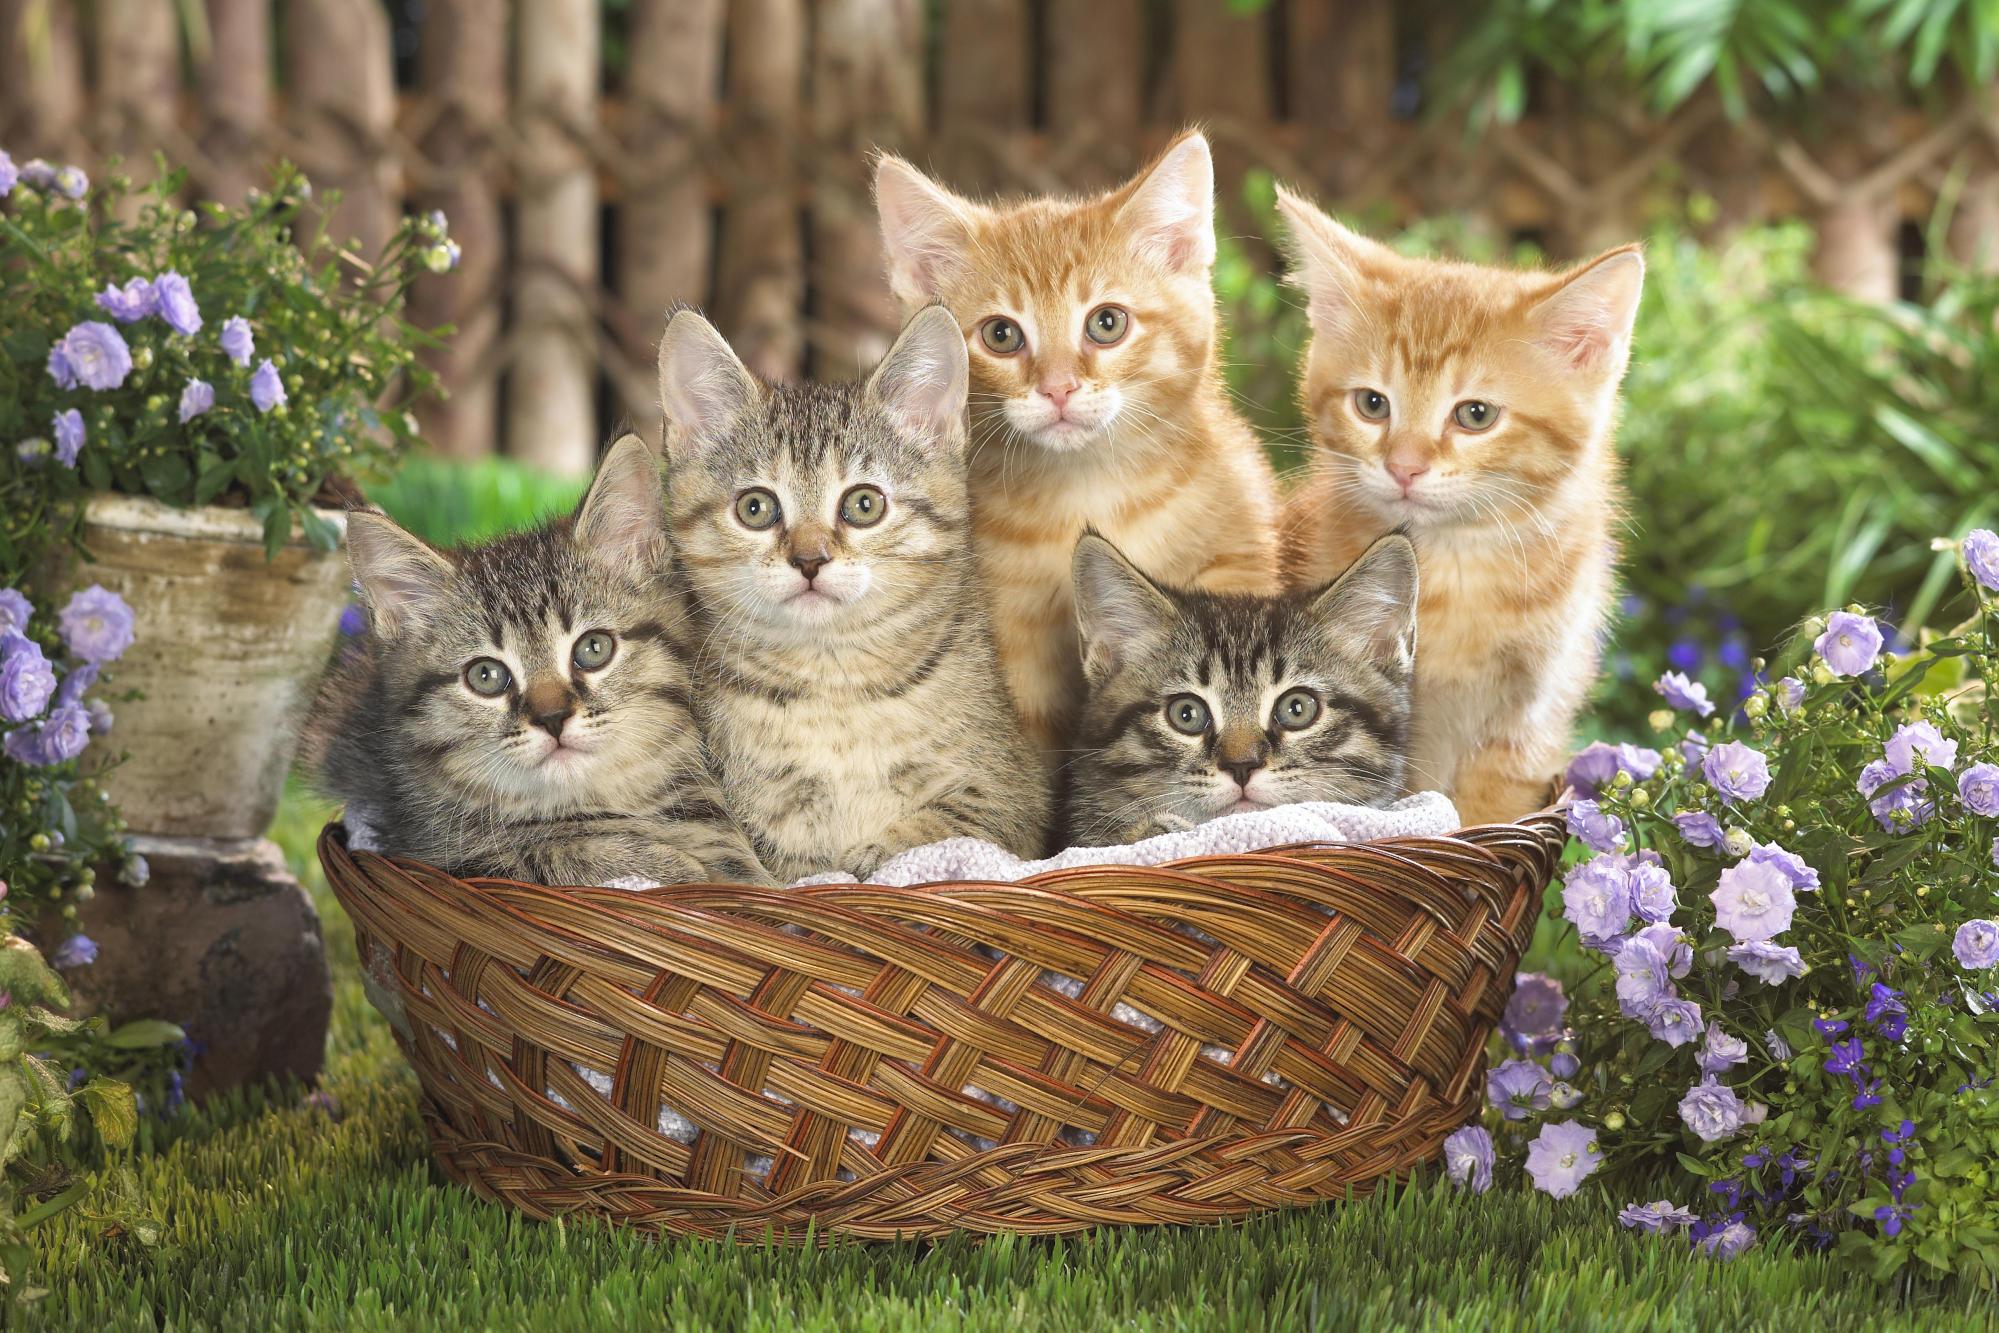 Картинки котиков. Kittens in a Basket Photographic Print on Canvas. Kittens in a Basket Photographic Print on Canvas animal.